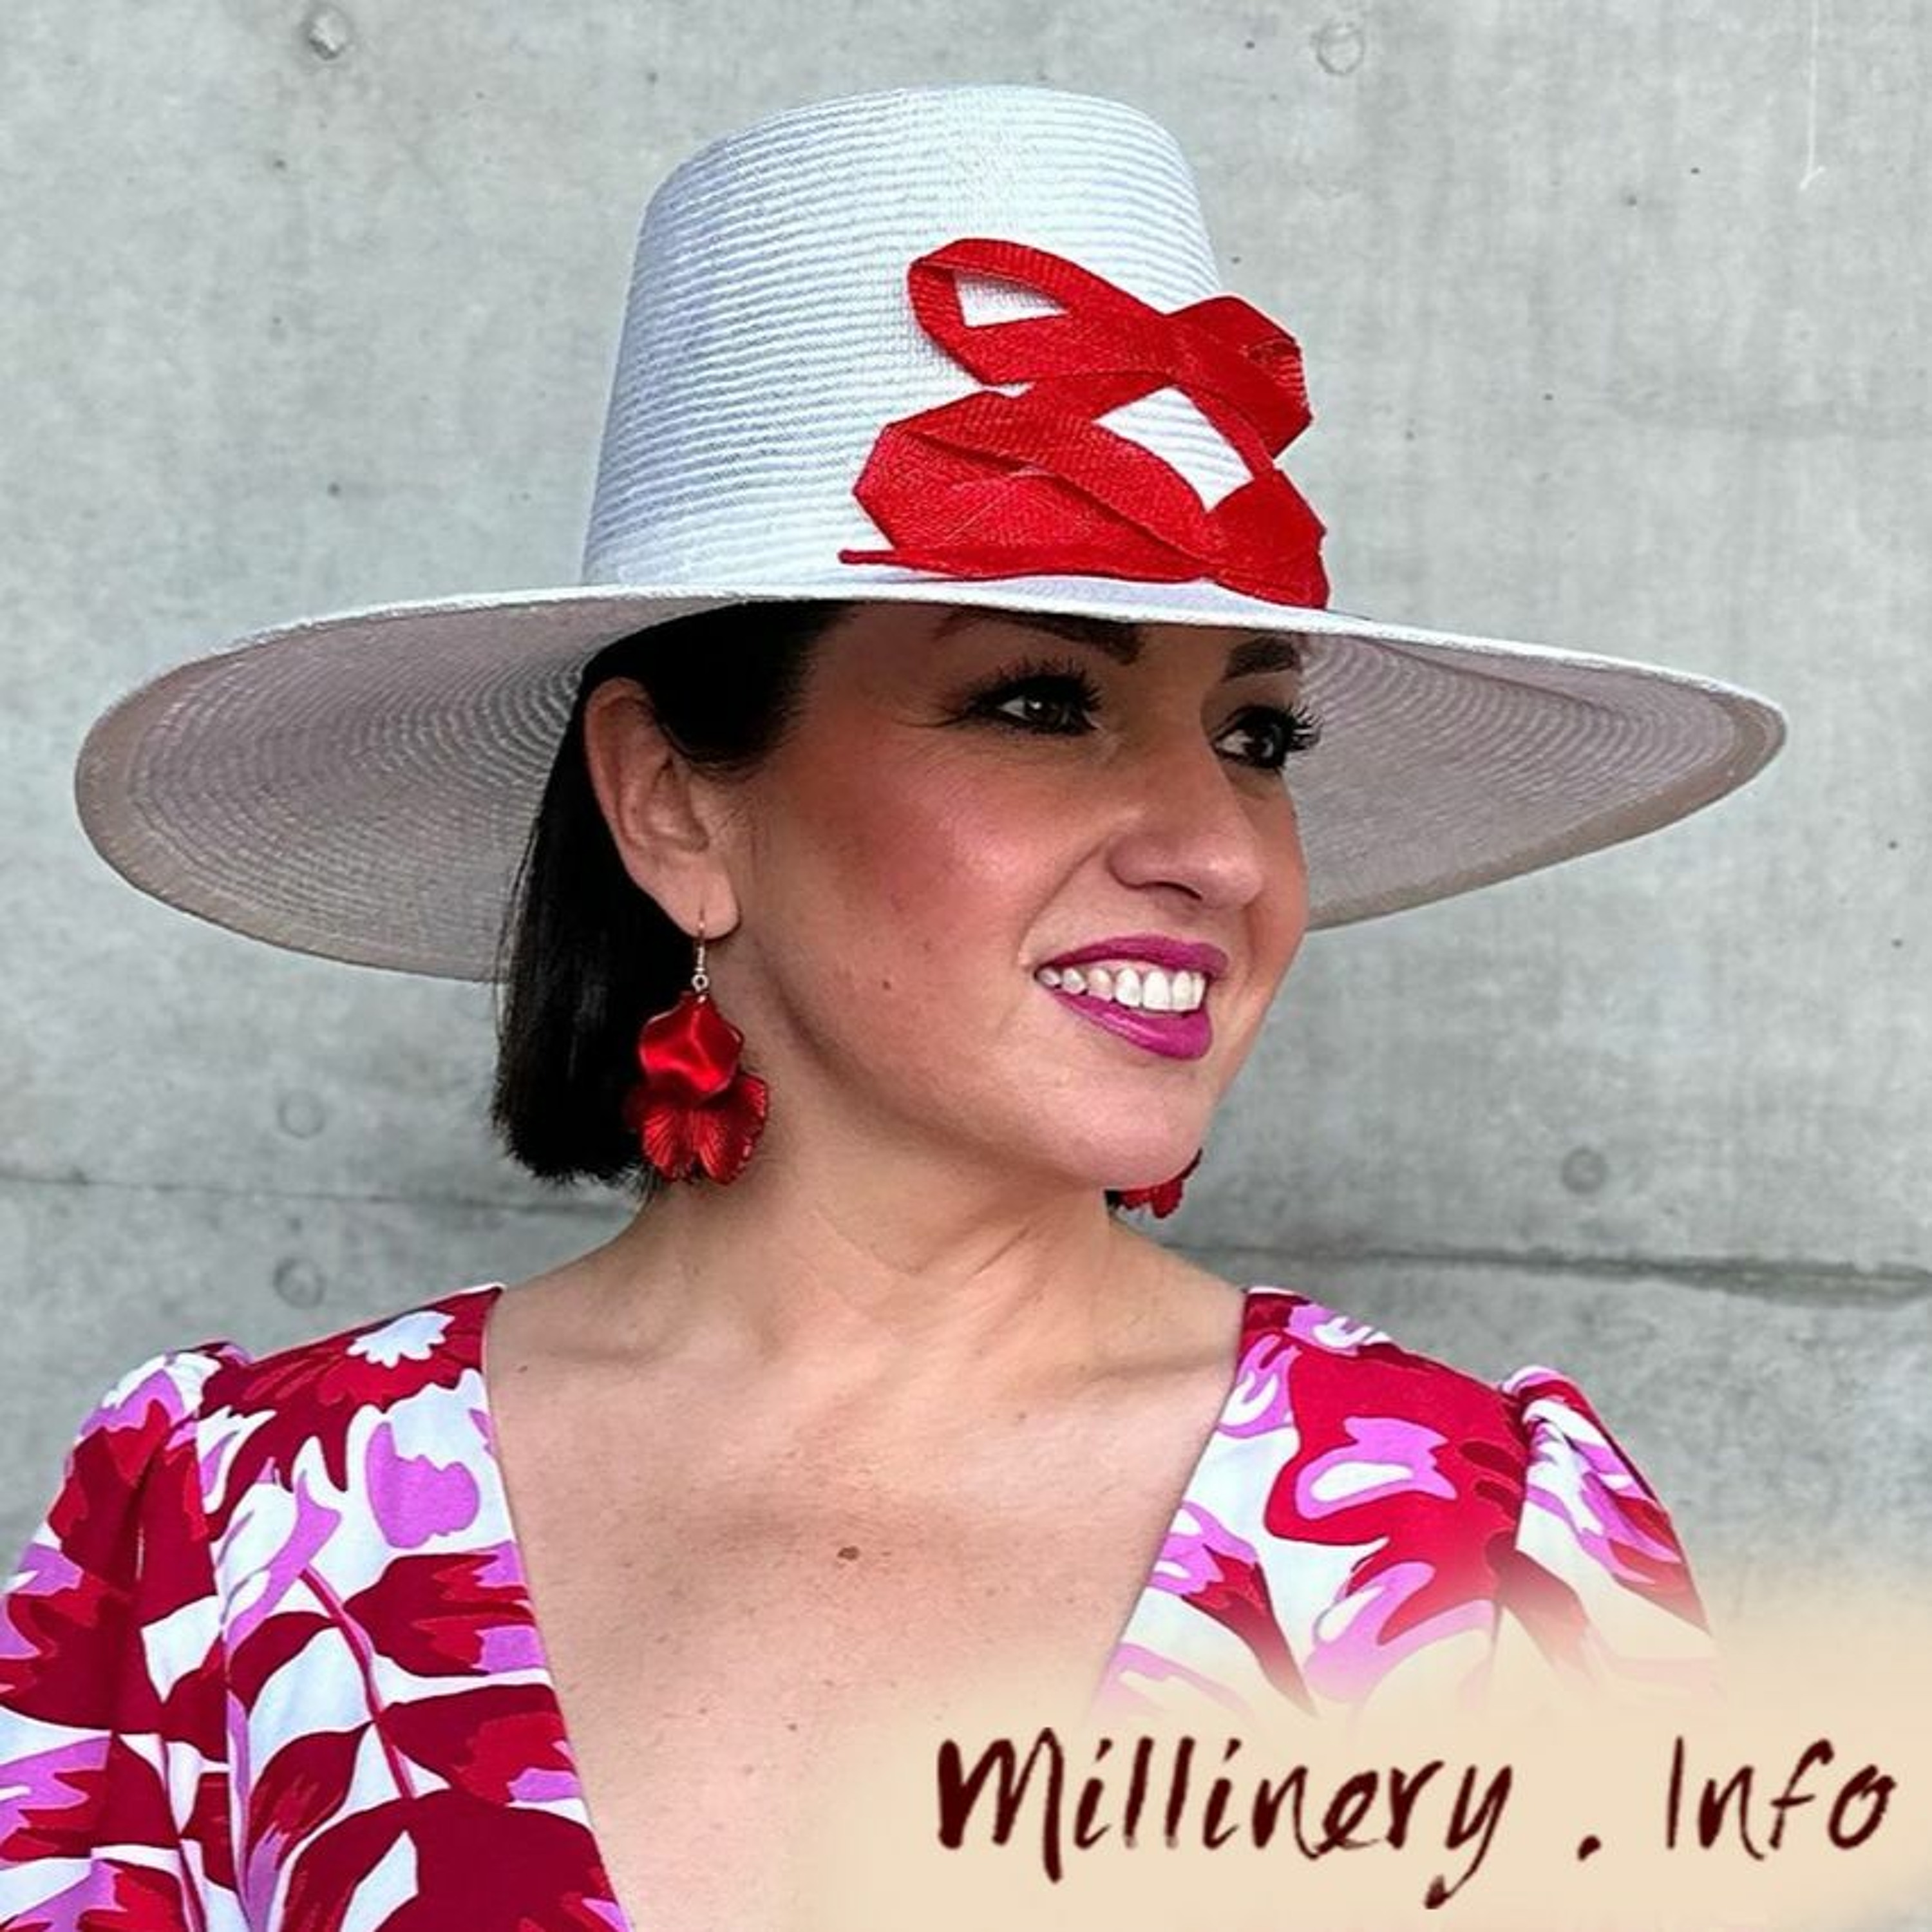 Somewhere Here - Andrea Cainero - Millinery.Info Podcast